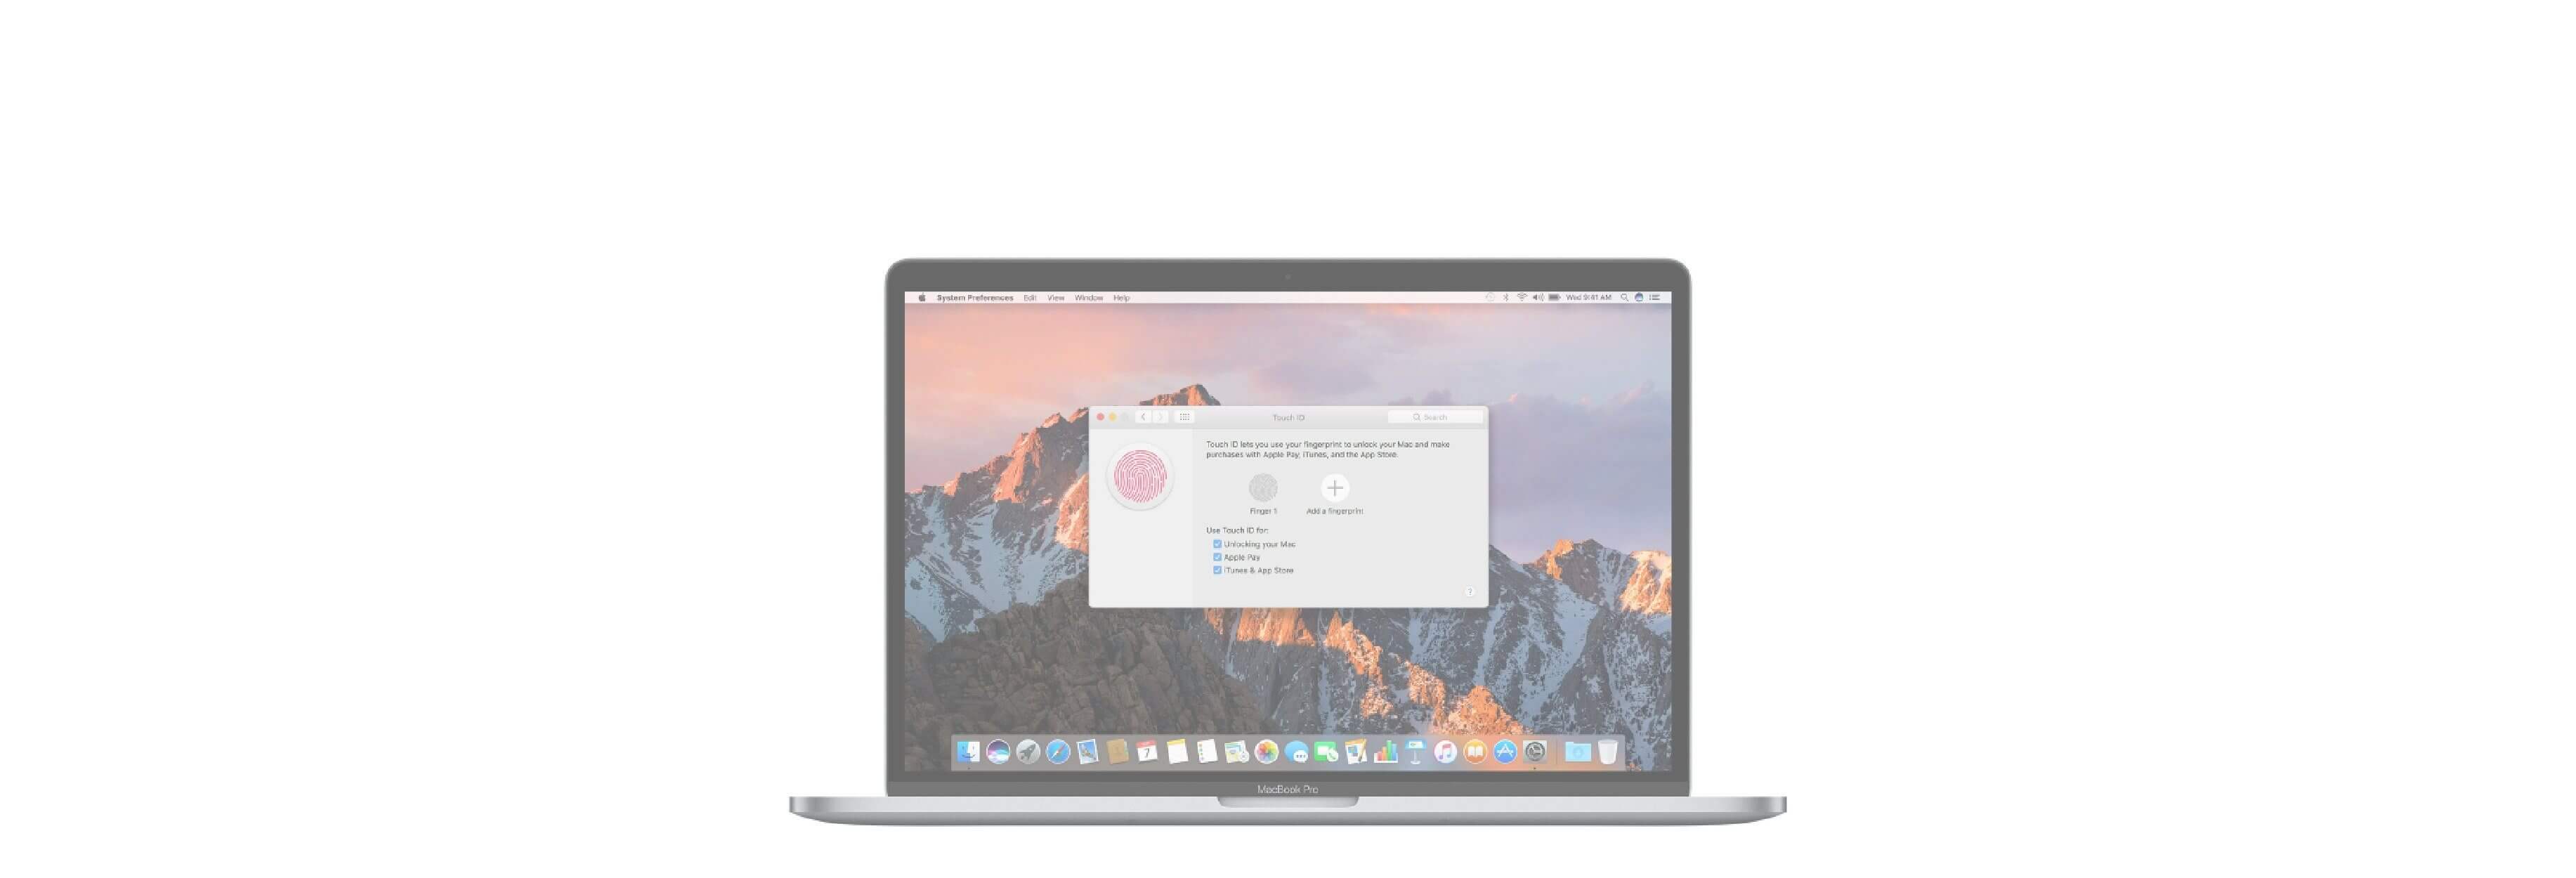 How to use Touch ID on your MacBook Air or MacBook Pro